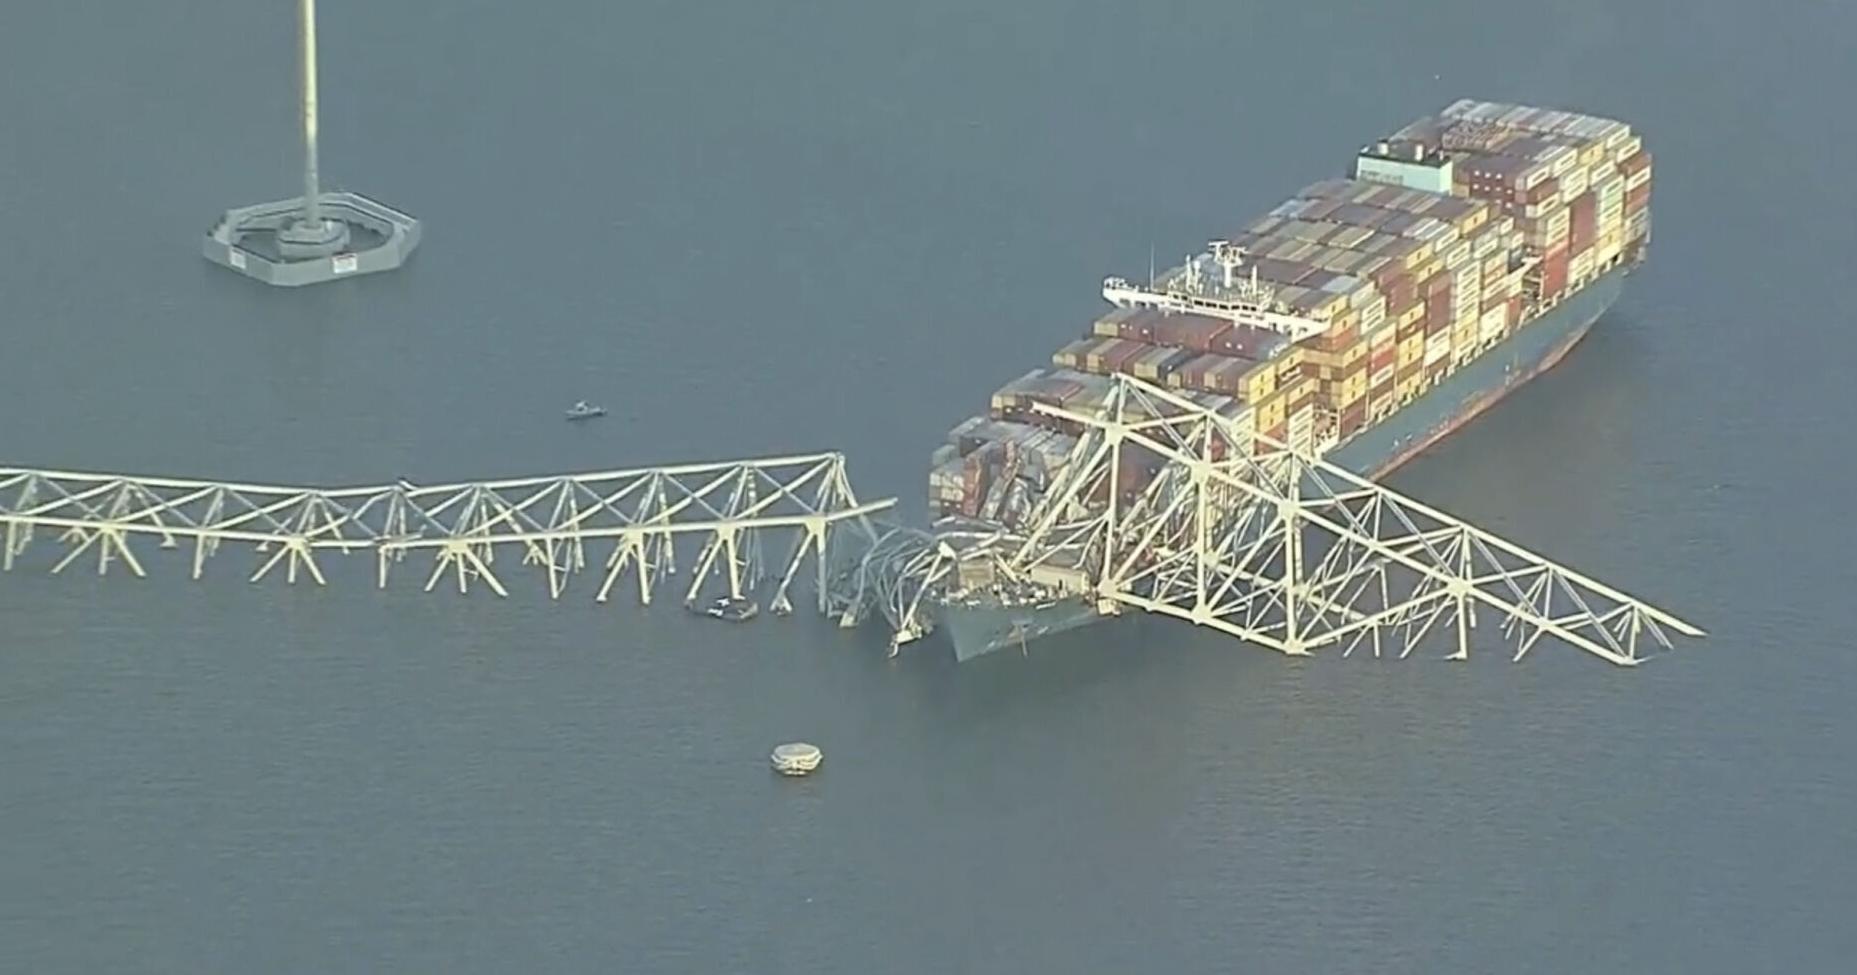 Cargo ship hits Baltimore's Key Bridge, bringing it down. Rescuers are looking for people in water. Video shows collapse, aftermath